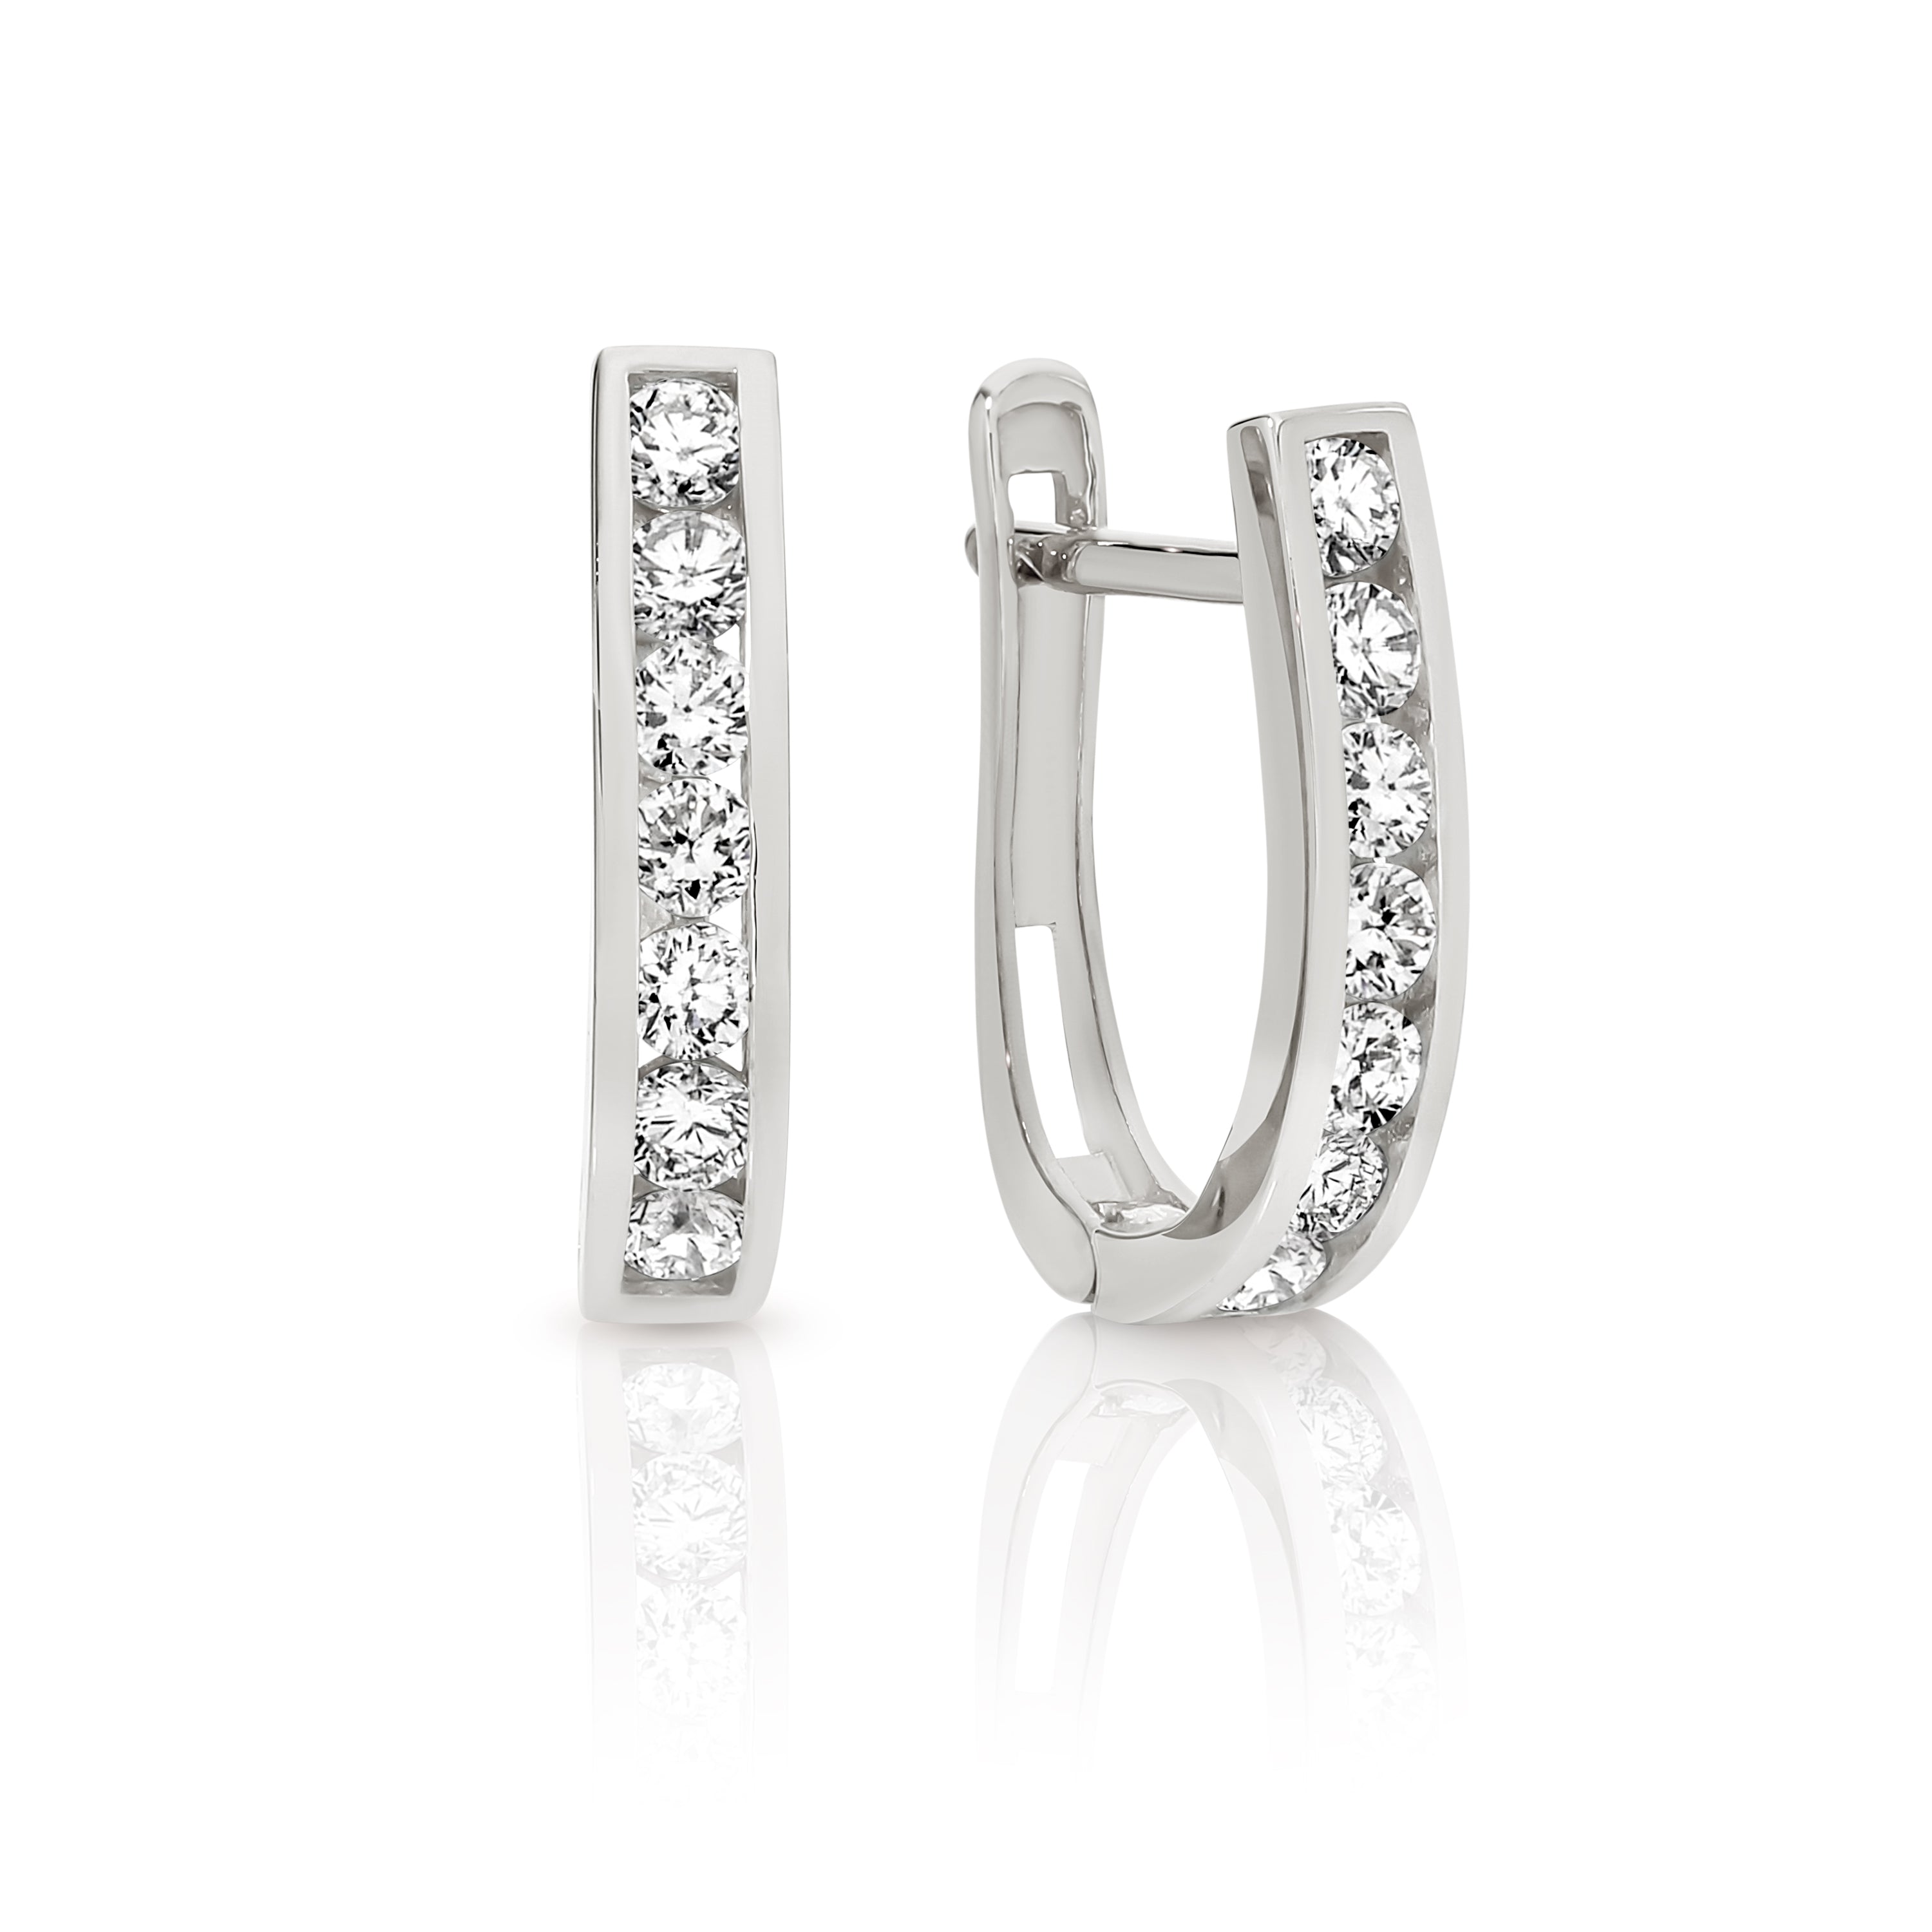 9ct white gold oval channel huggies